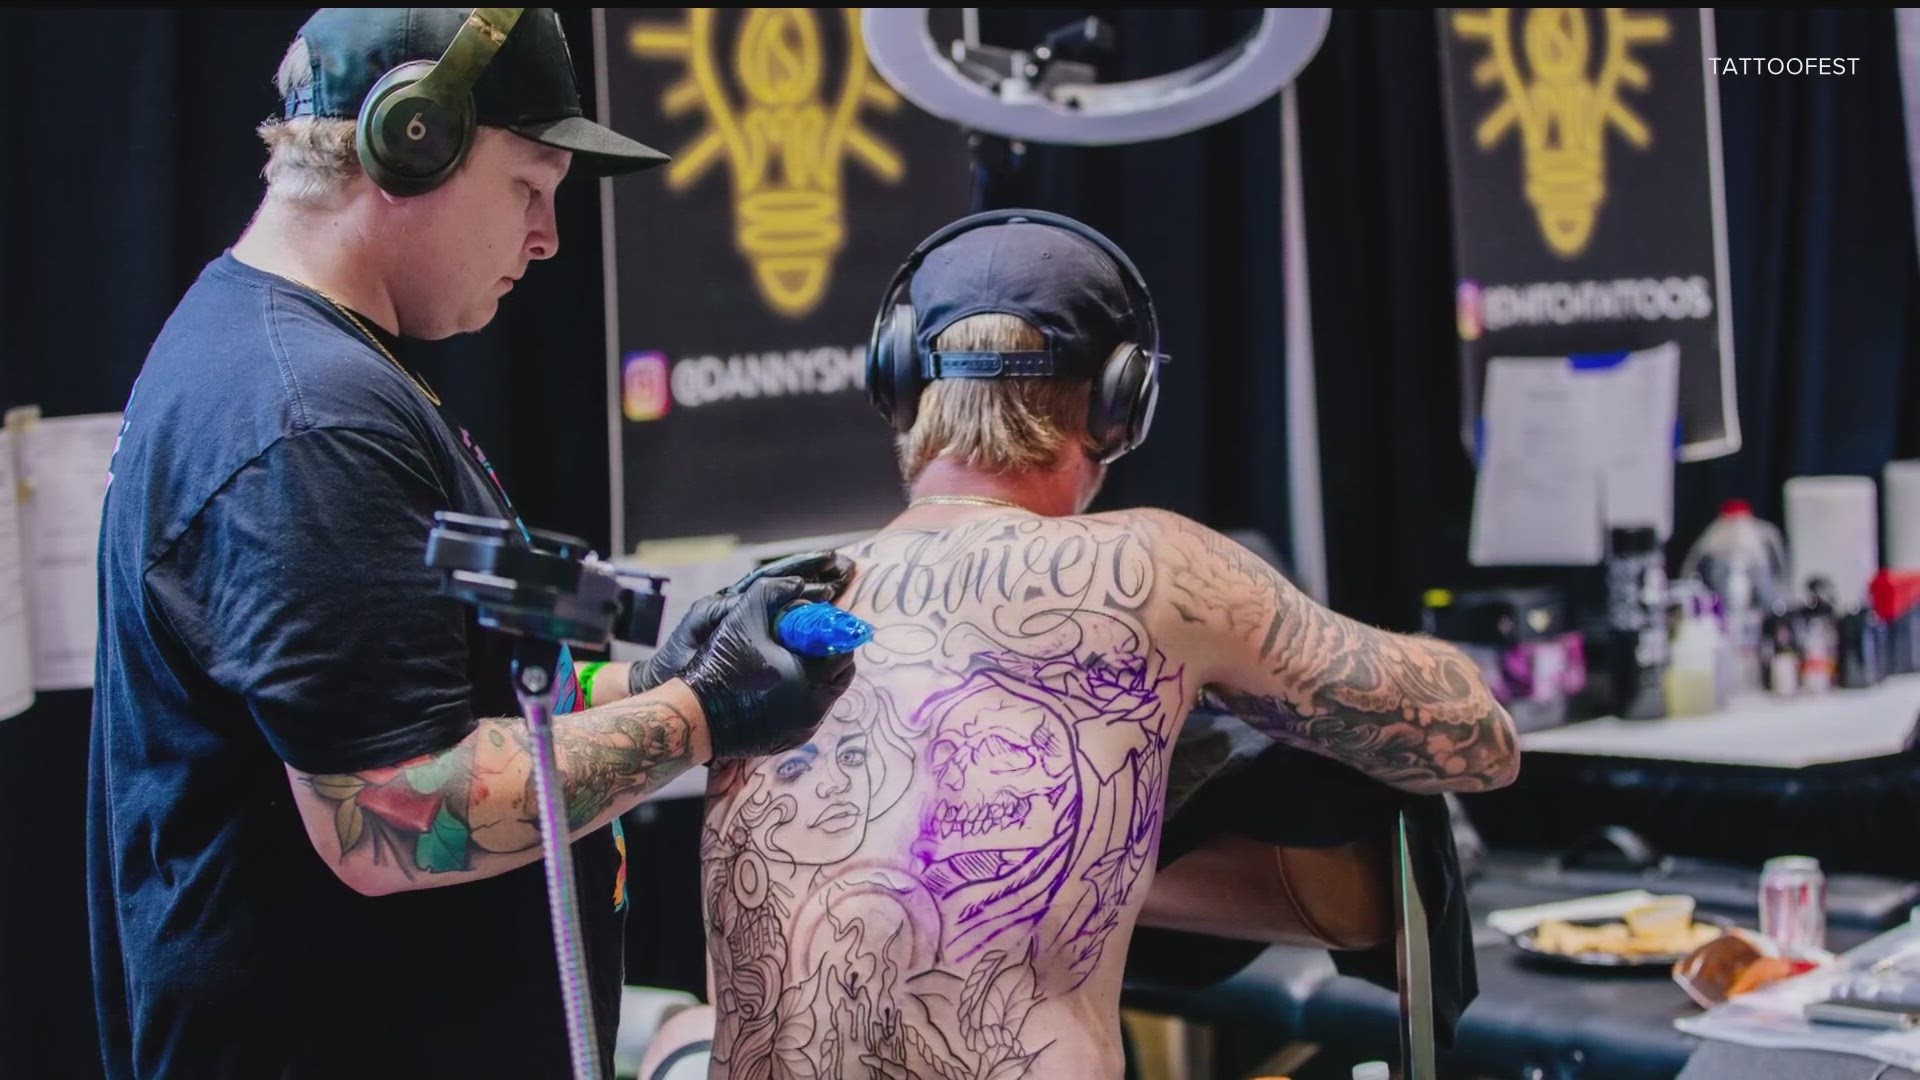 World Tattoo Events | Renowned tattoo artist @andrey_kolbasin is set to  showcase his talent at the 3rd Annual @thenewyorktattooconvention at the  @duggalgreenho... | Instagram